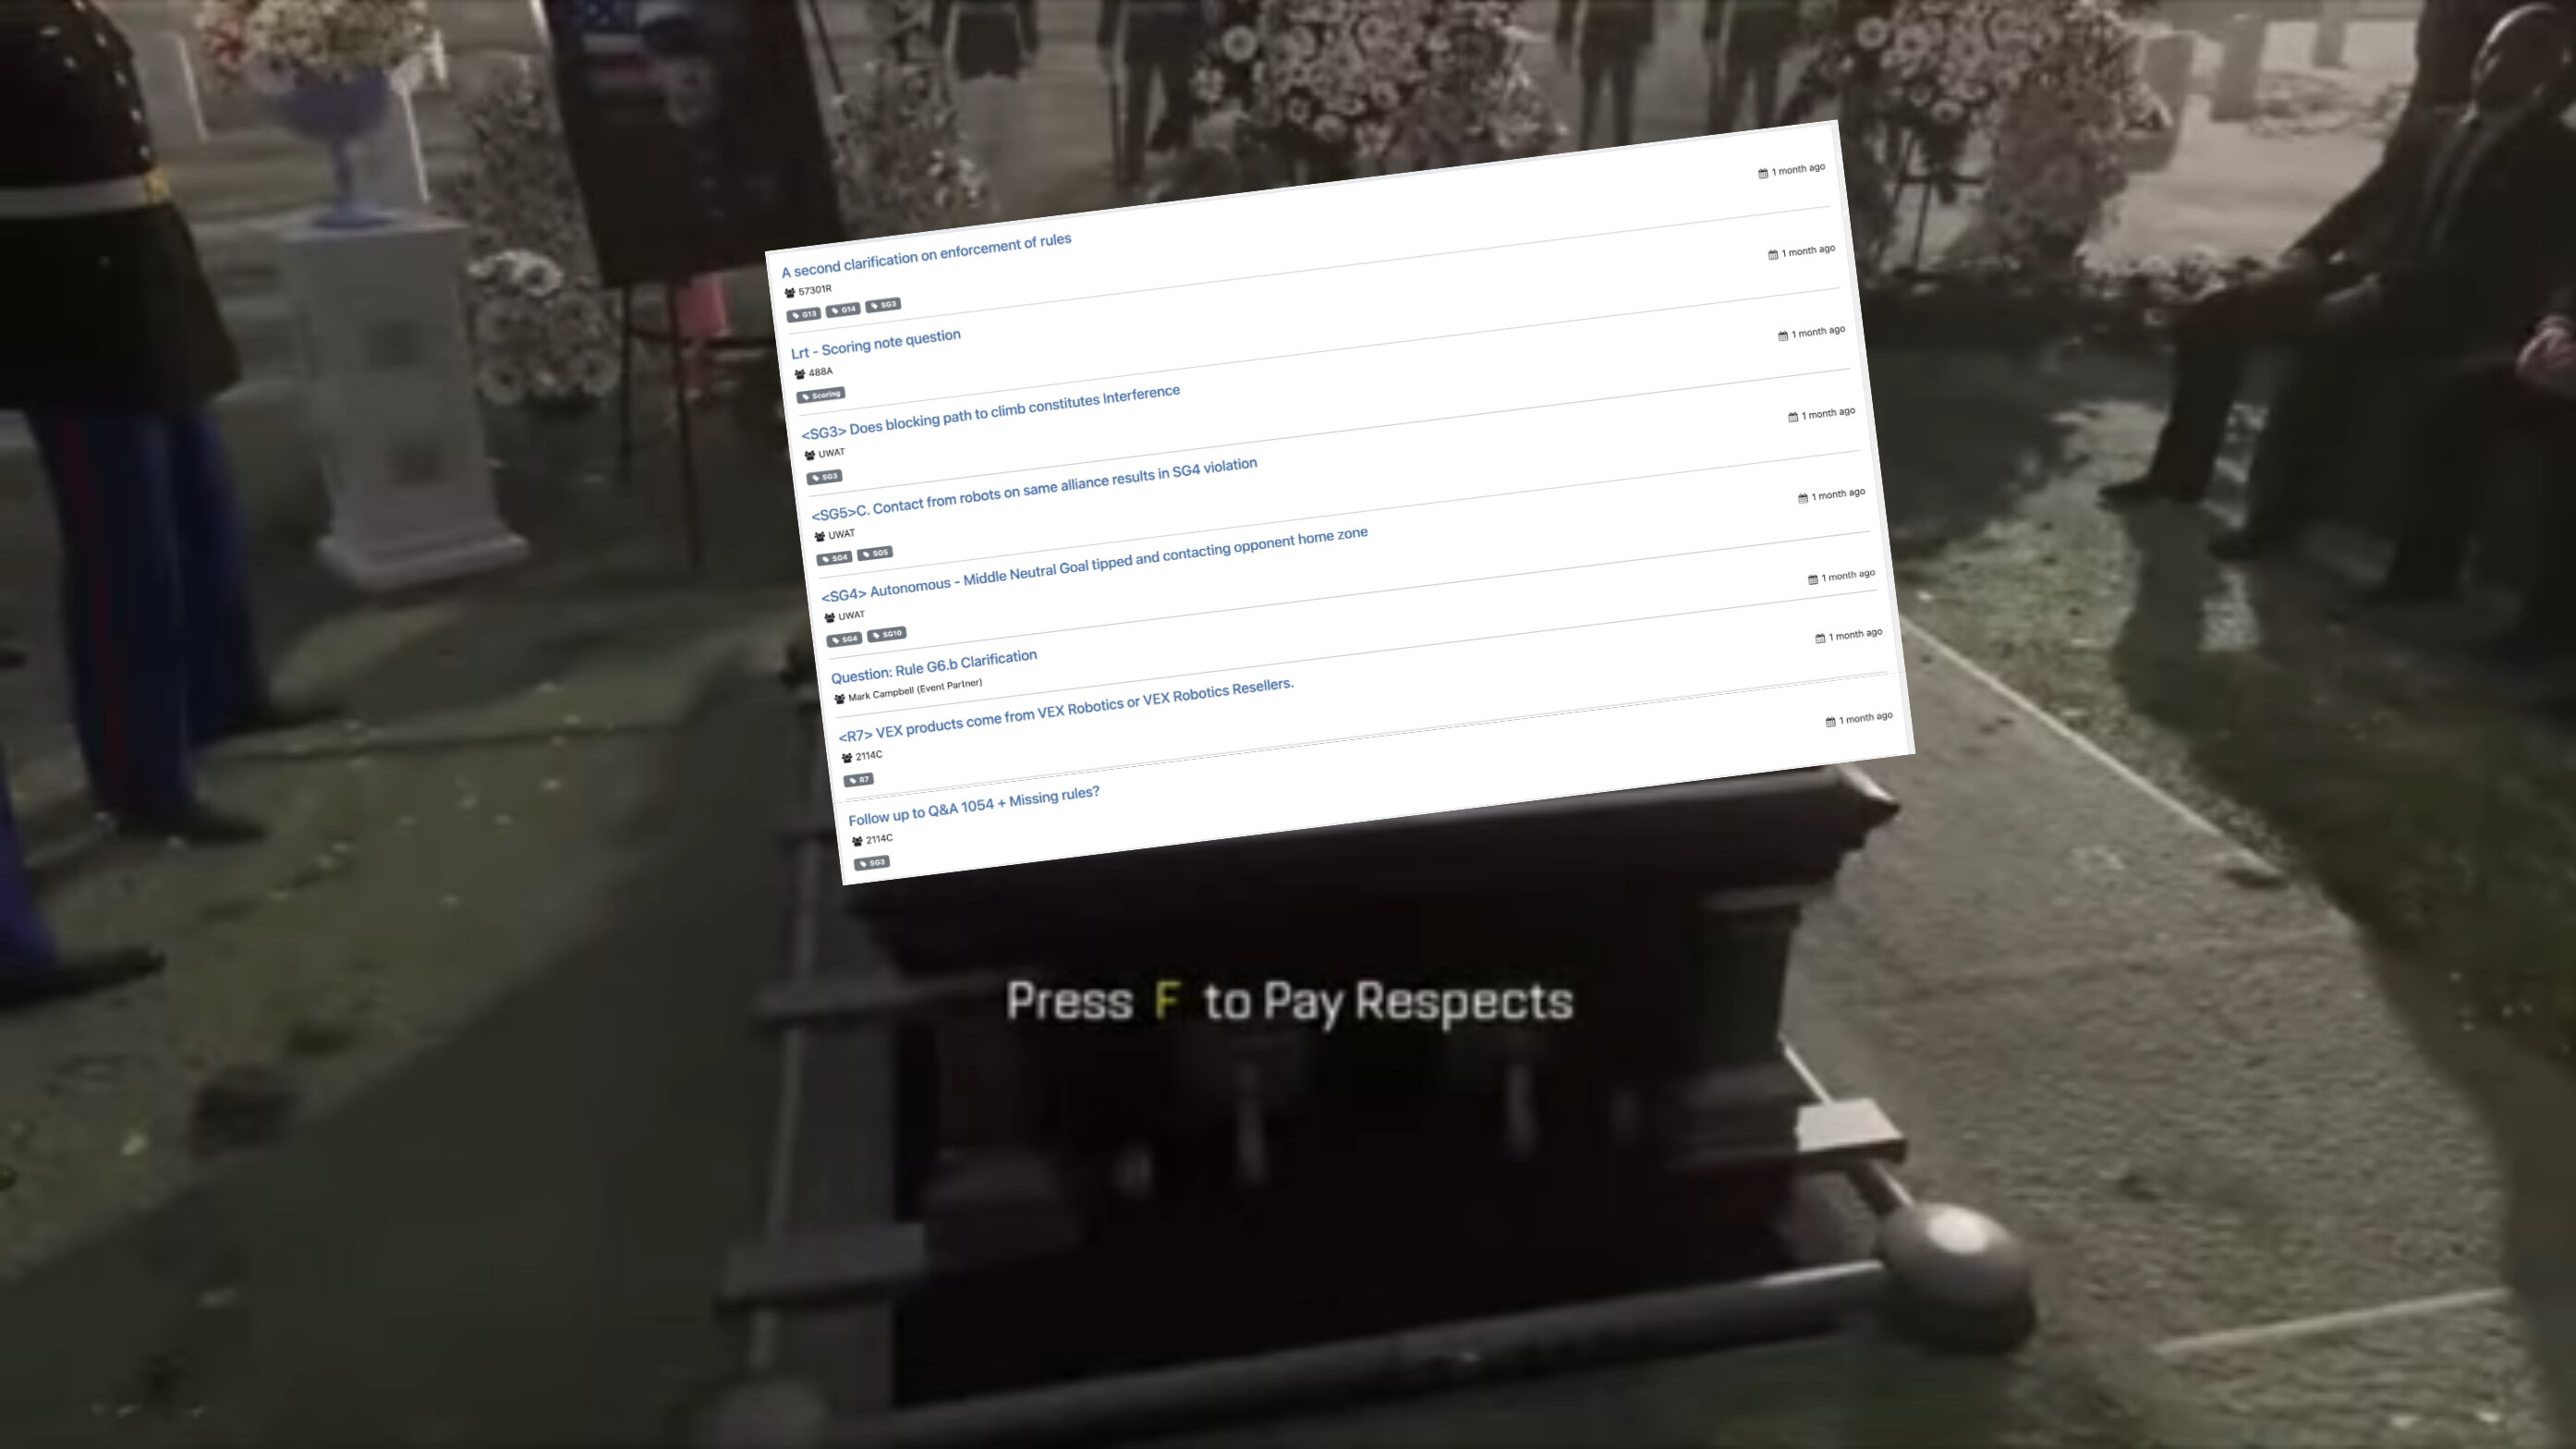 Minecraft press f to pay respects Memes & GIFs - Imgflip